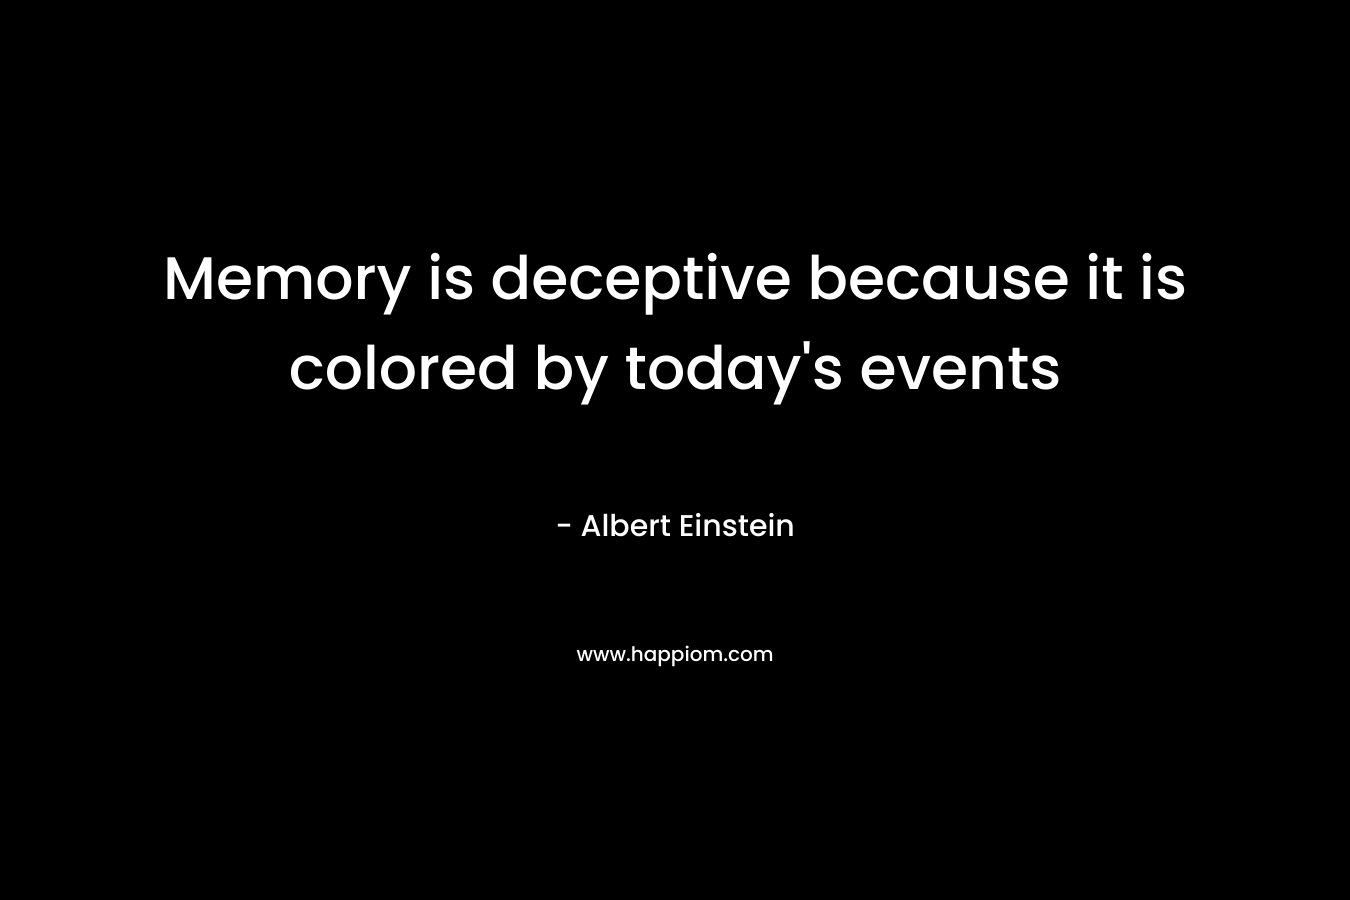 Memory is deceptive because it is colored by today’s events – Albert Einstein